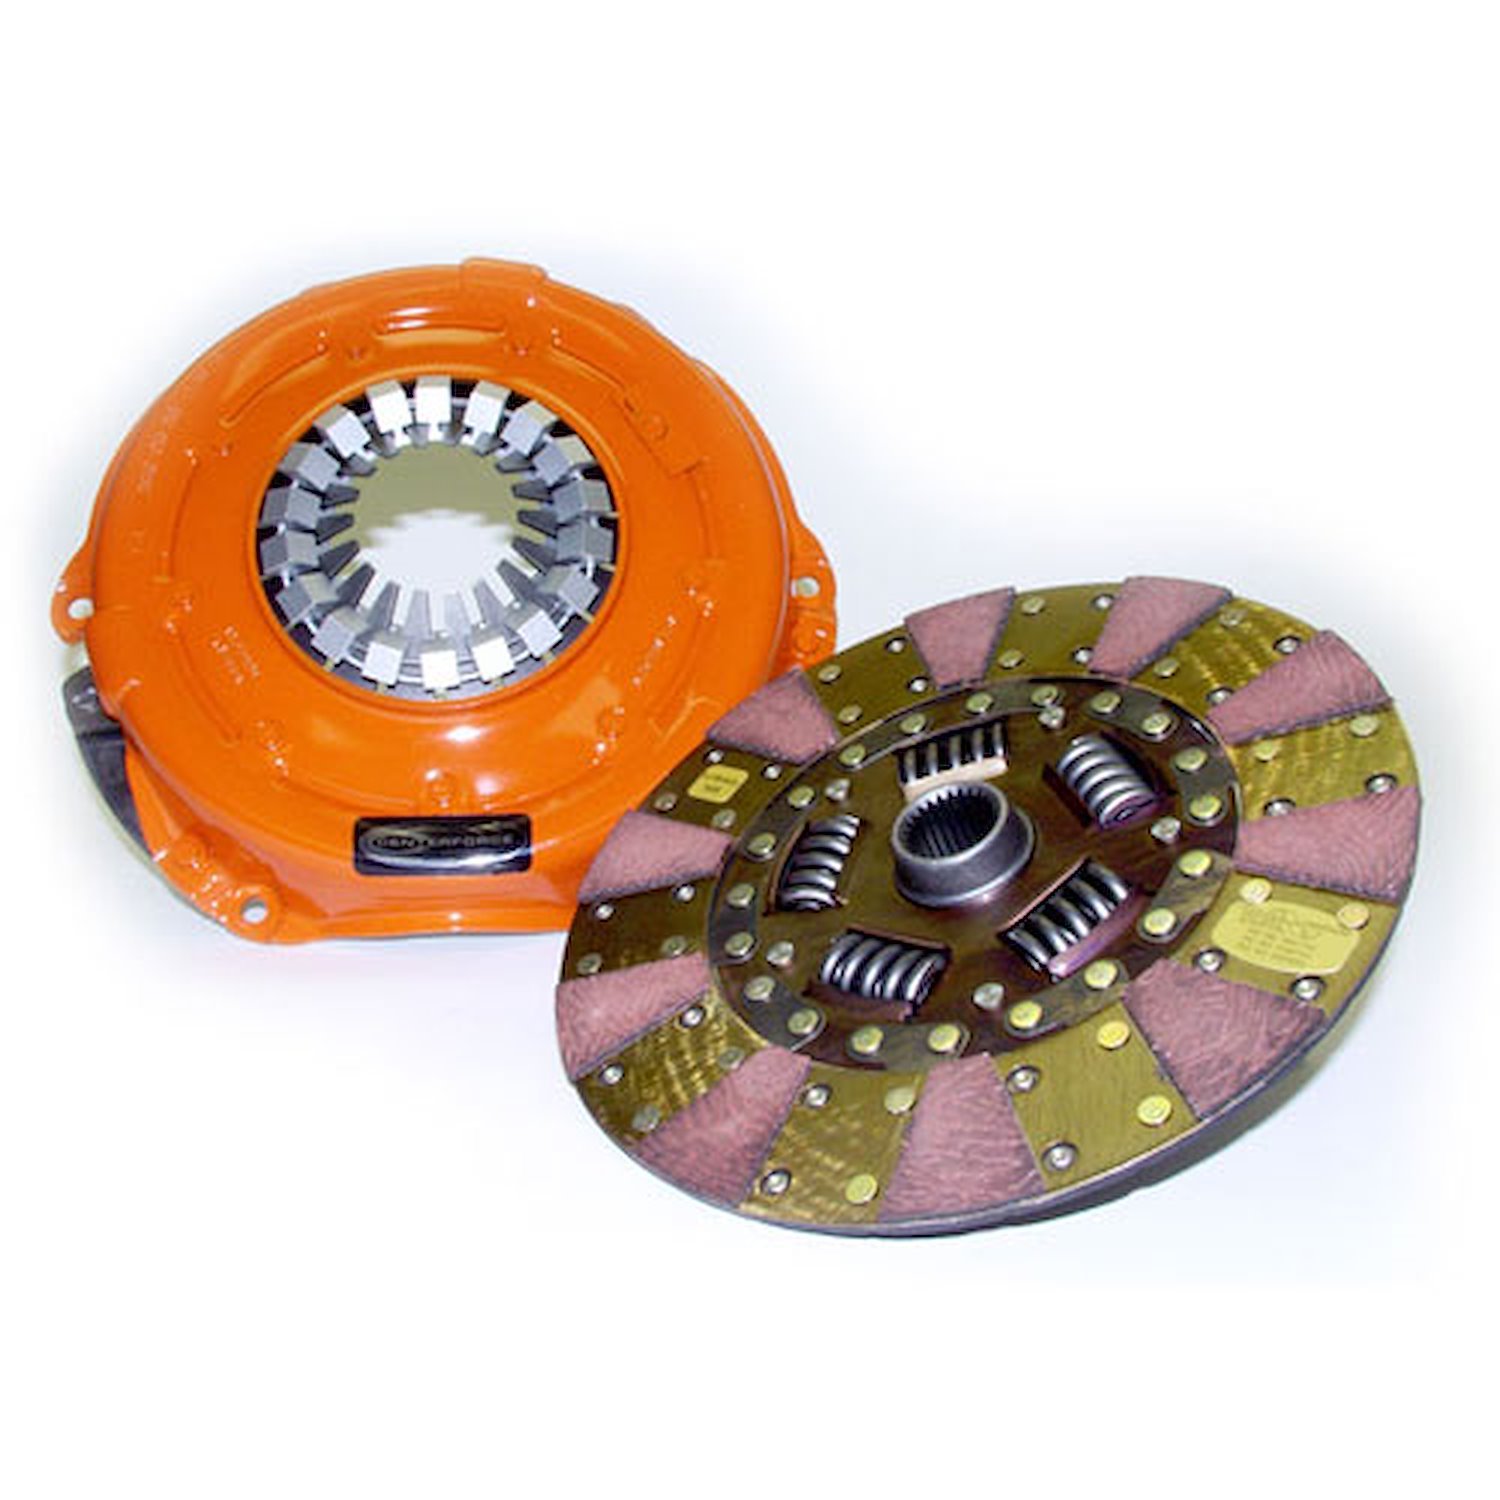 Dual Friction Clutch Includes Pressure Plate, Disc, &